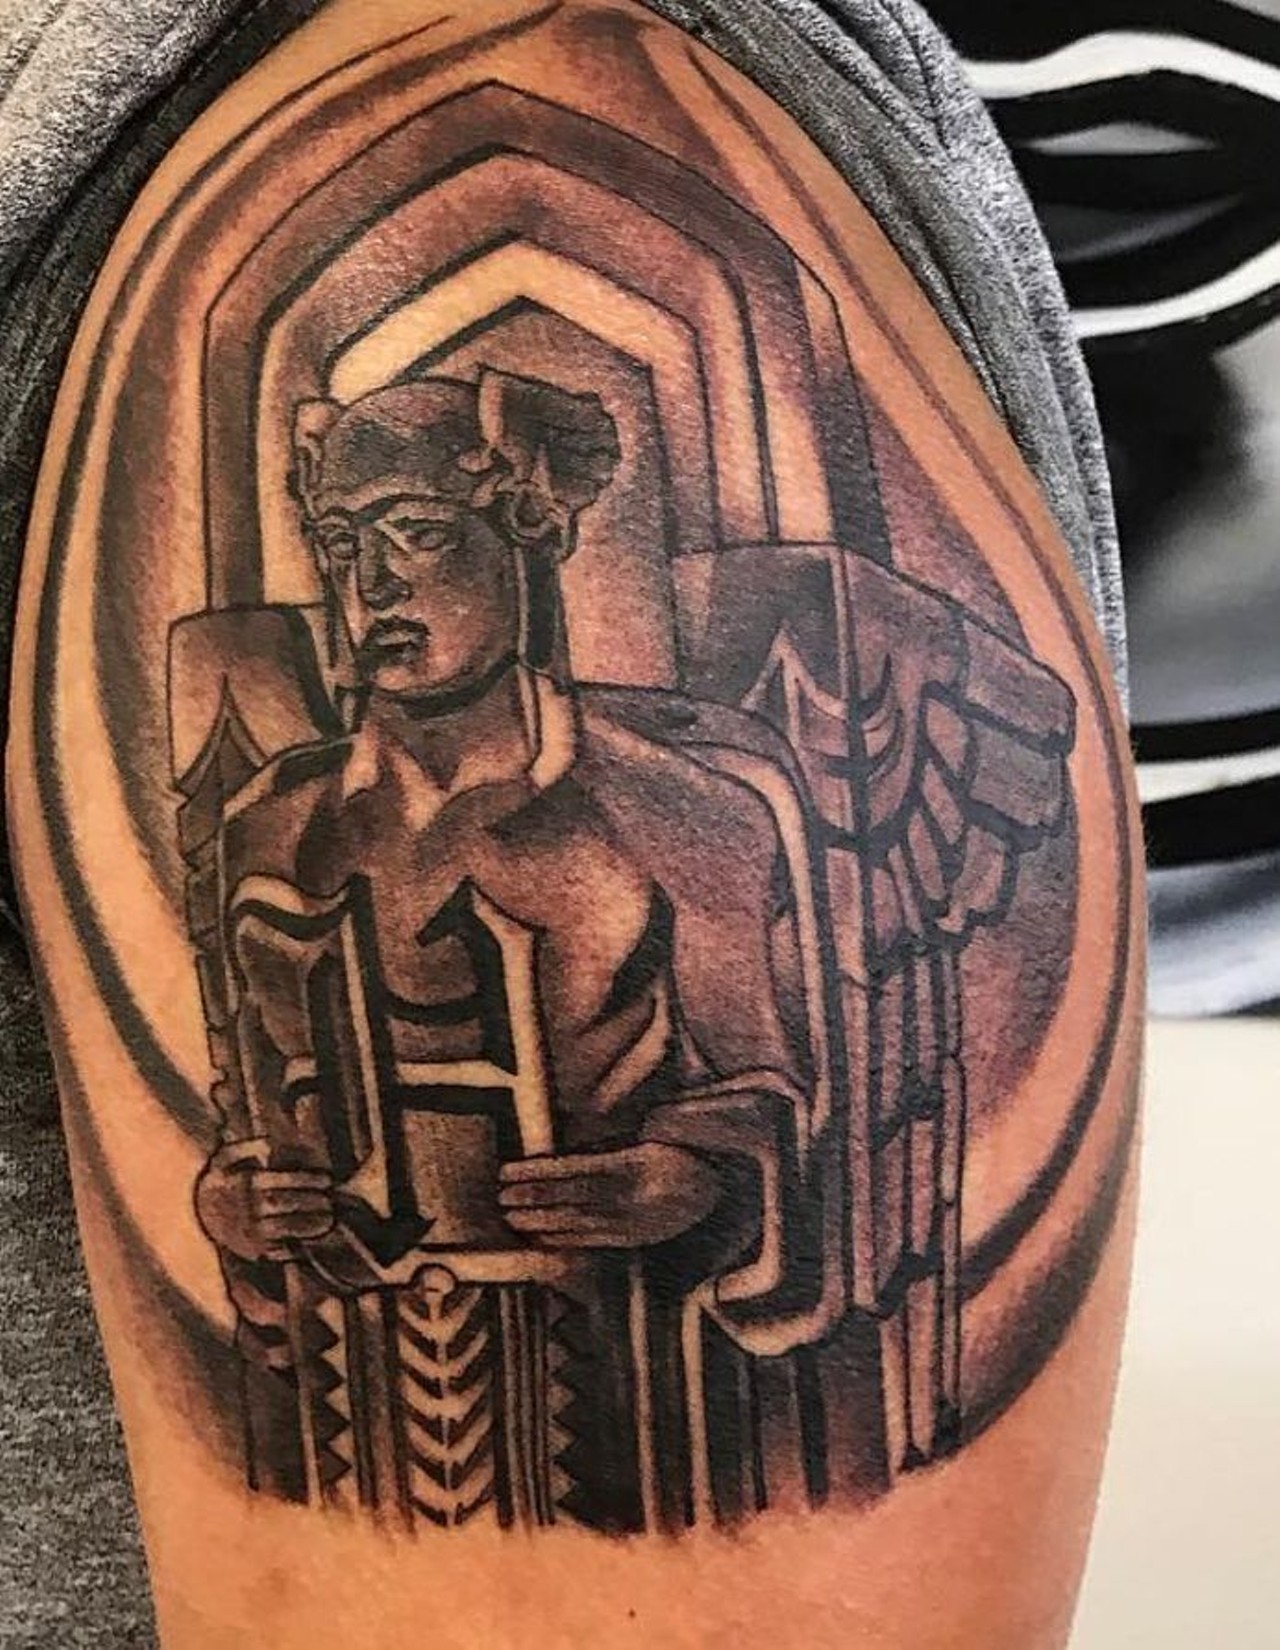 21 Cleveland Tattoo Artists You Should Already Be Following on Instagram |  Cleveland | Cleveland Scene